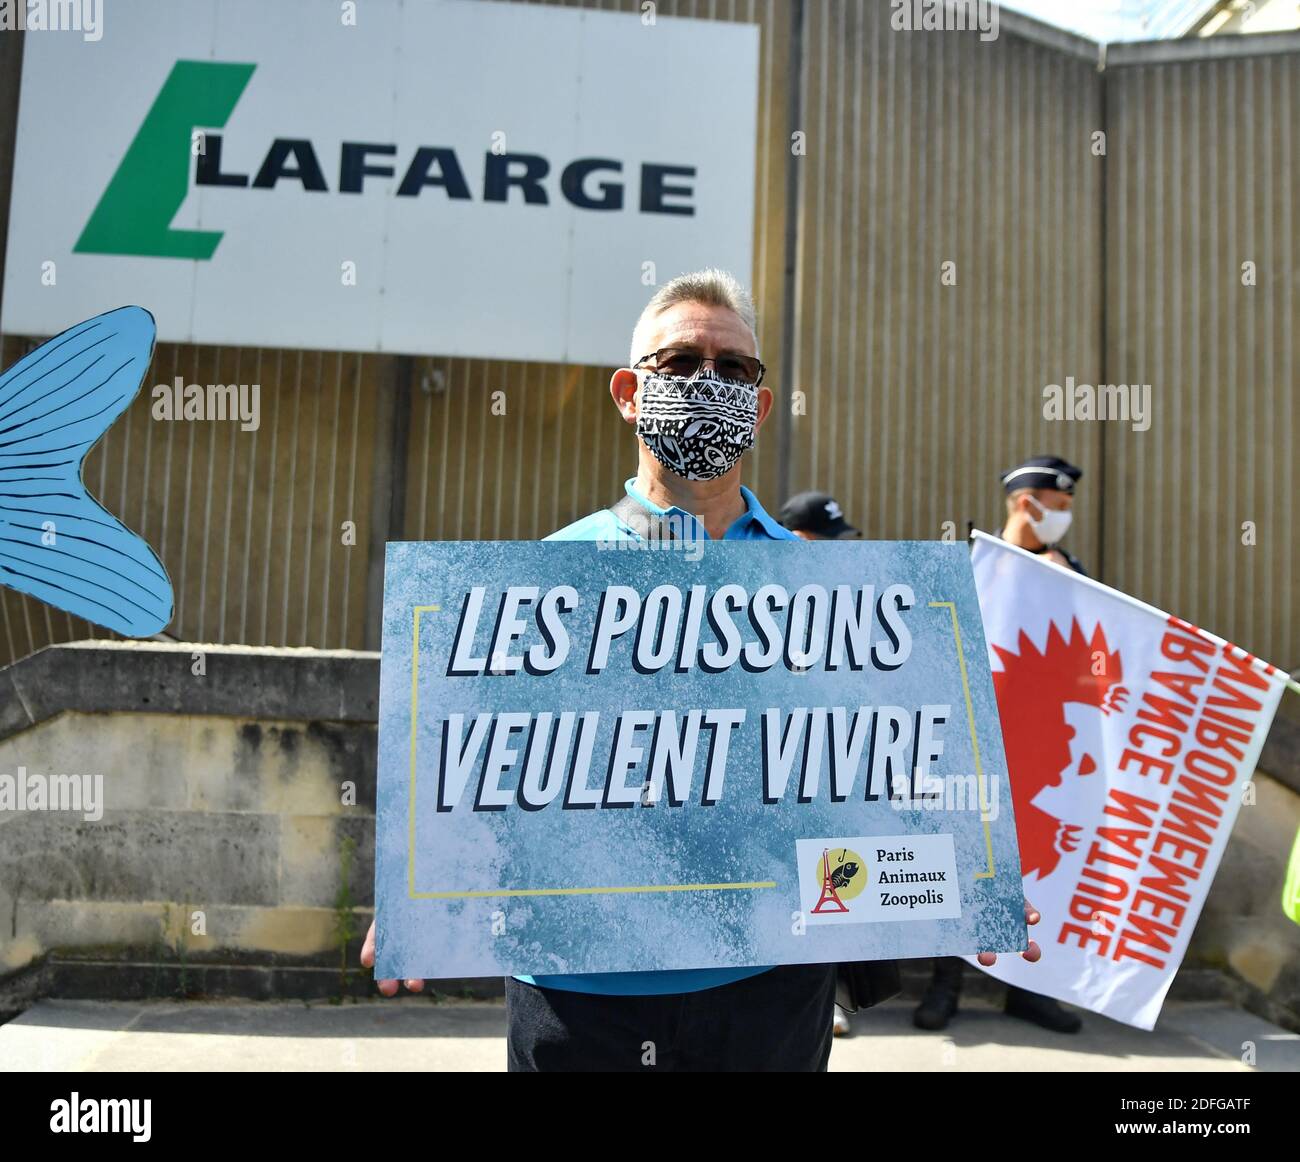 Demonstration in front of the Lafarge cement plant on the Quai de Bercy to  denounce the discharge of pollutants into the Seine. Paris, France on 7  September 2020. The cement manufacturer Lafarge